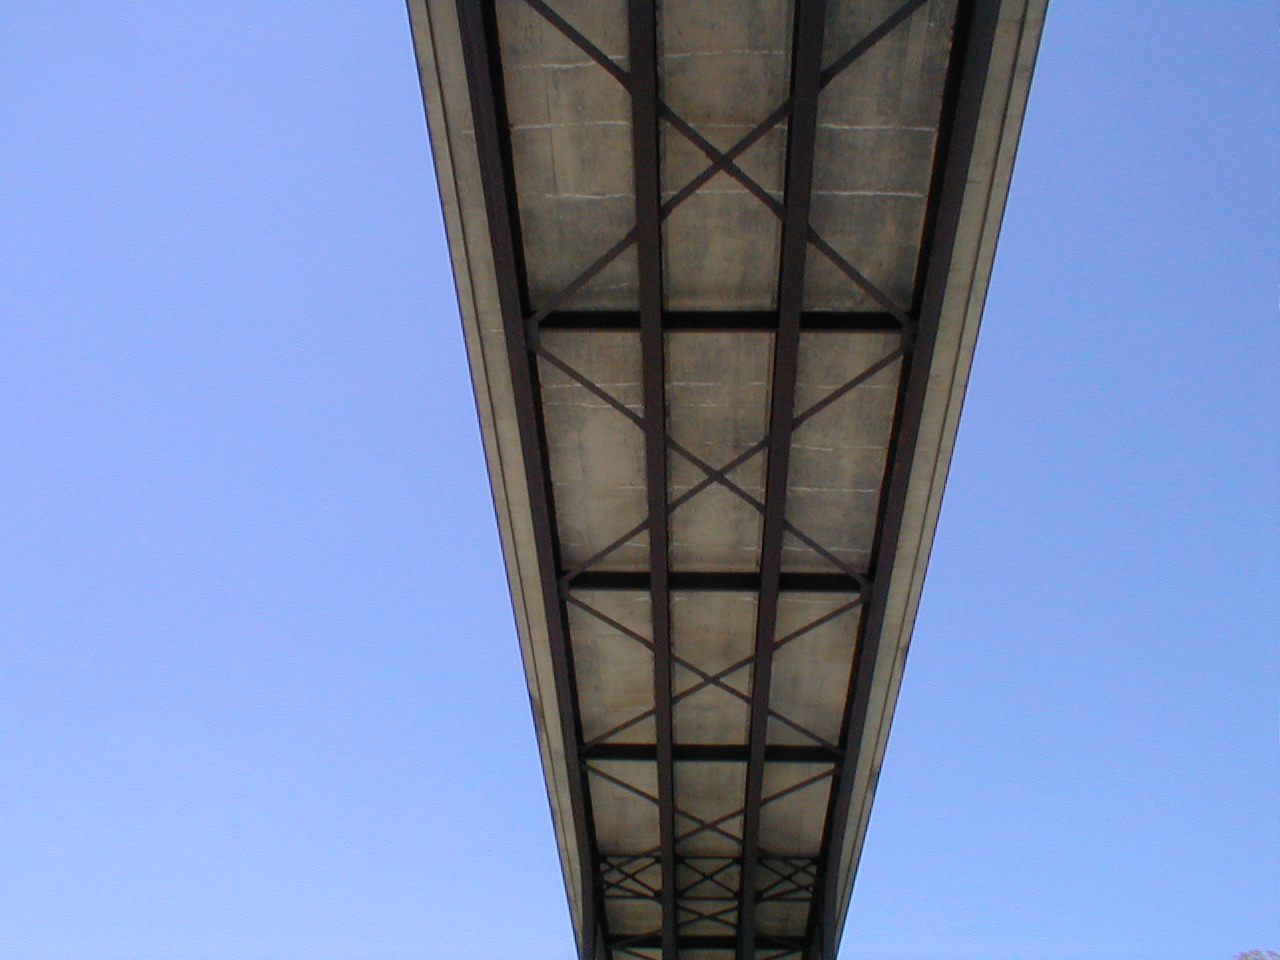 A view of the underside of the bridge.